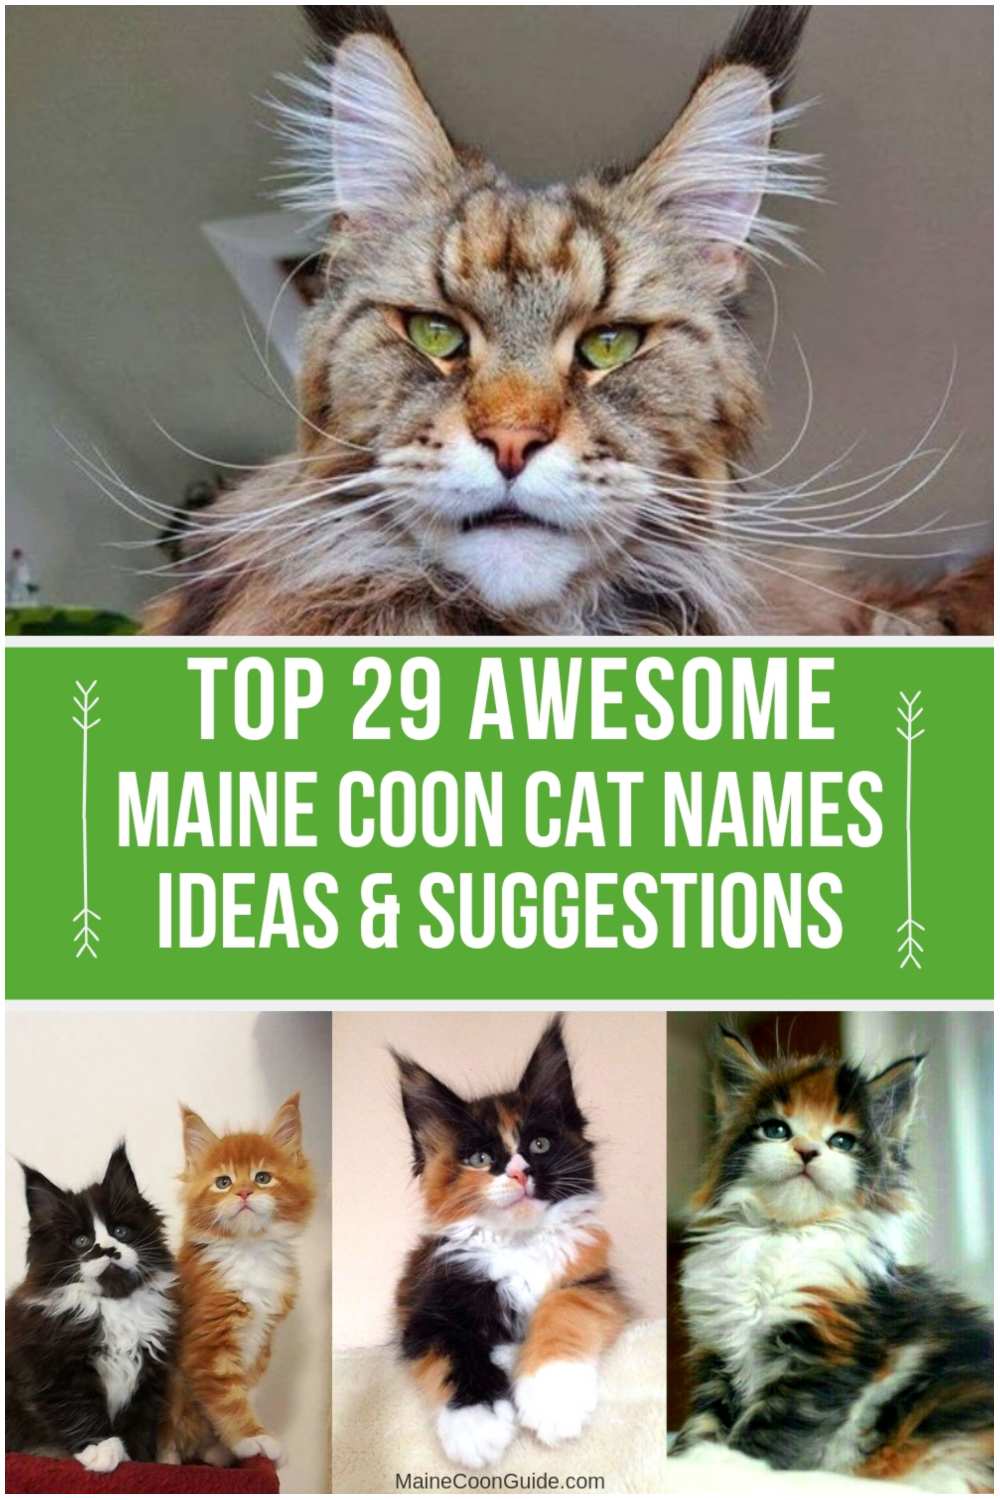 Top 29 Awesome Maine Coon Cat Names Ideas